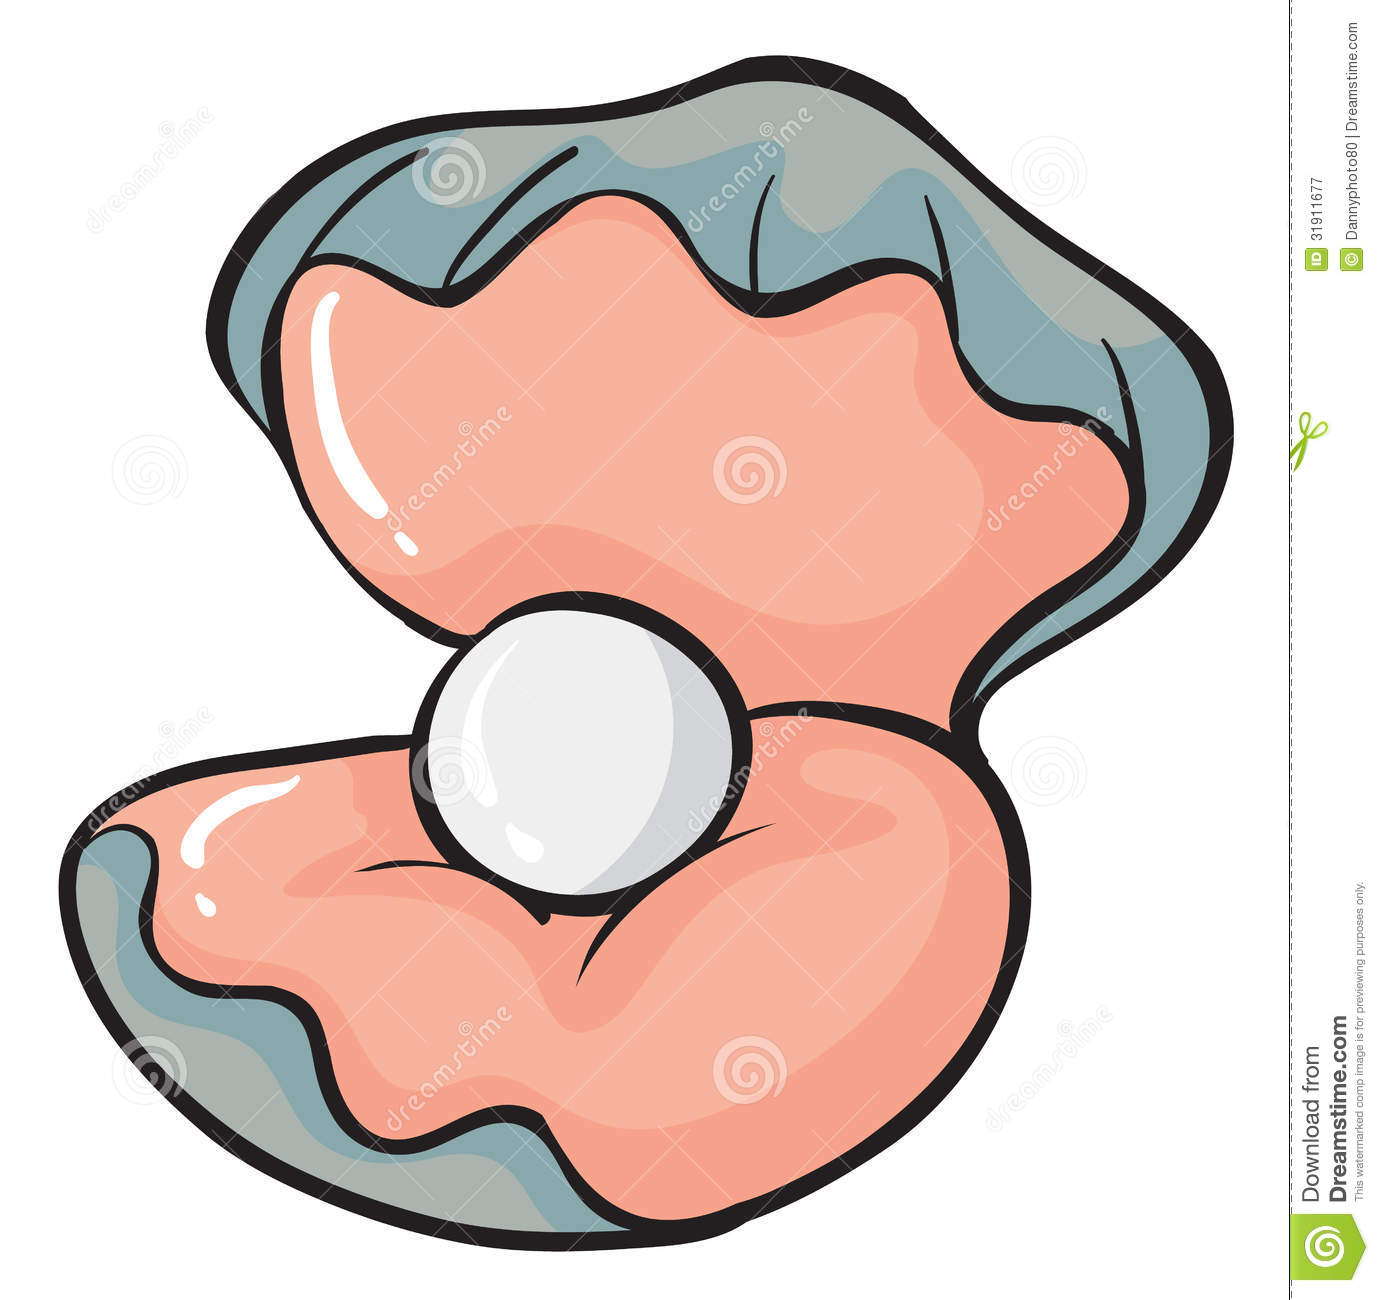 oyster clipart cute